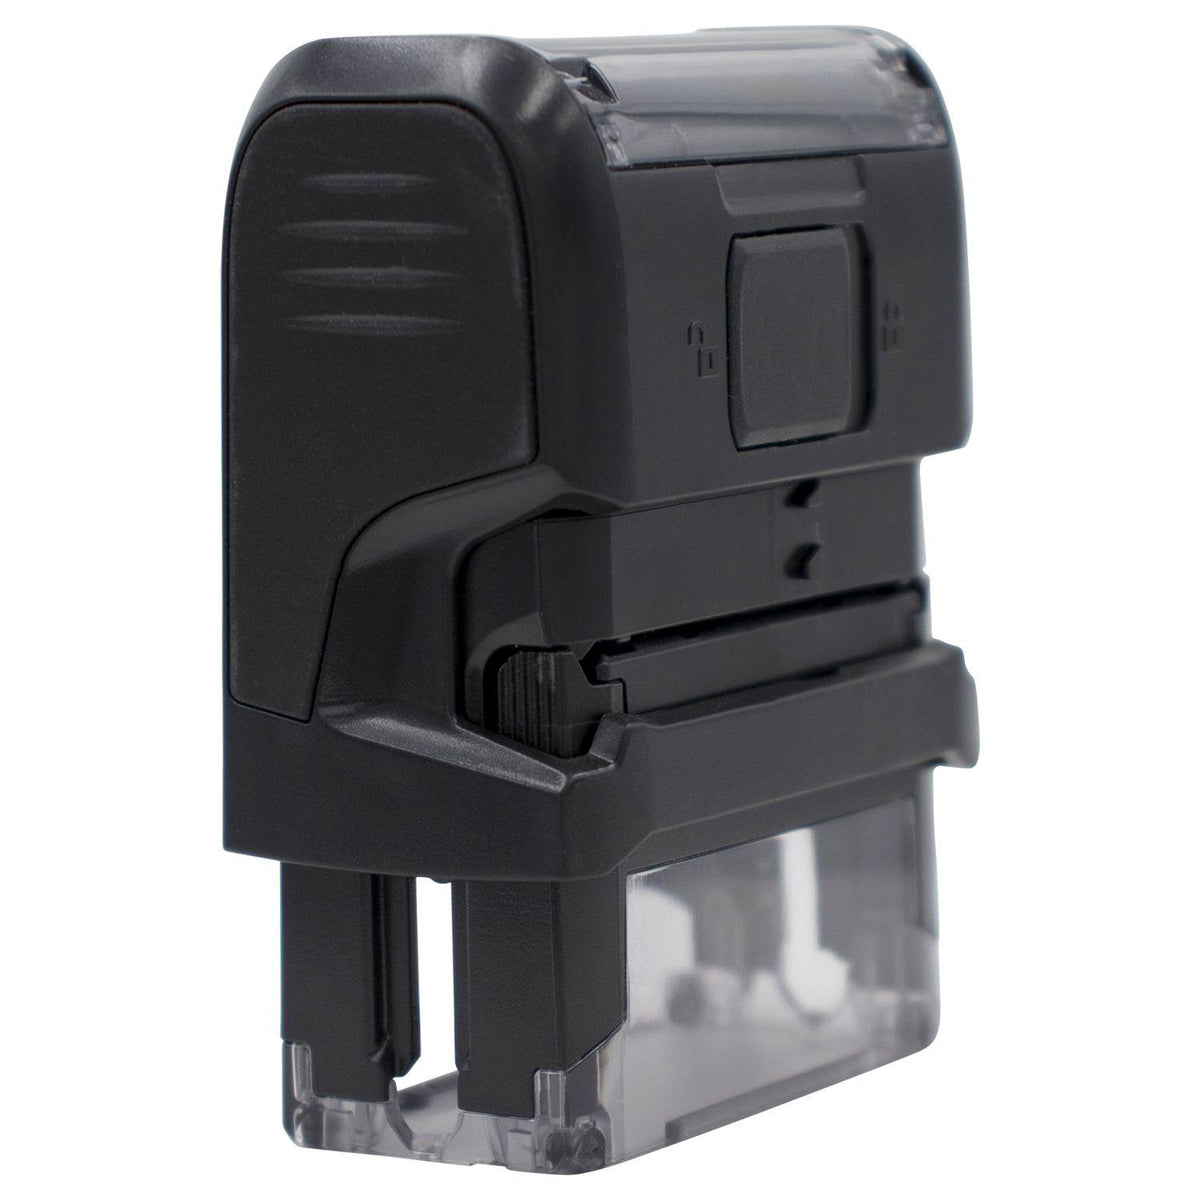 Large Self-Inking Please Review with your child Stamp - Engineer Seal Stamps - Brand_Trodat, Impression Size_Large, Stamp Type_Self-Inking Stamp, Type of Use_Teacher